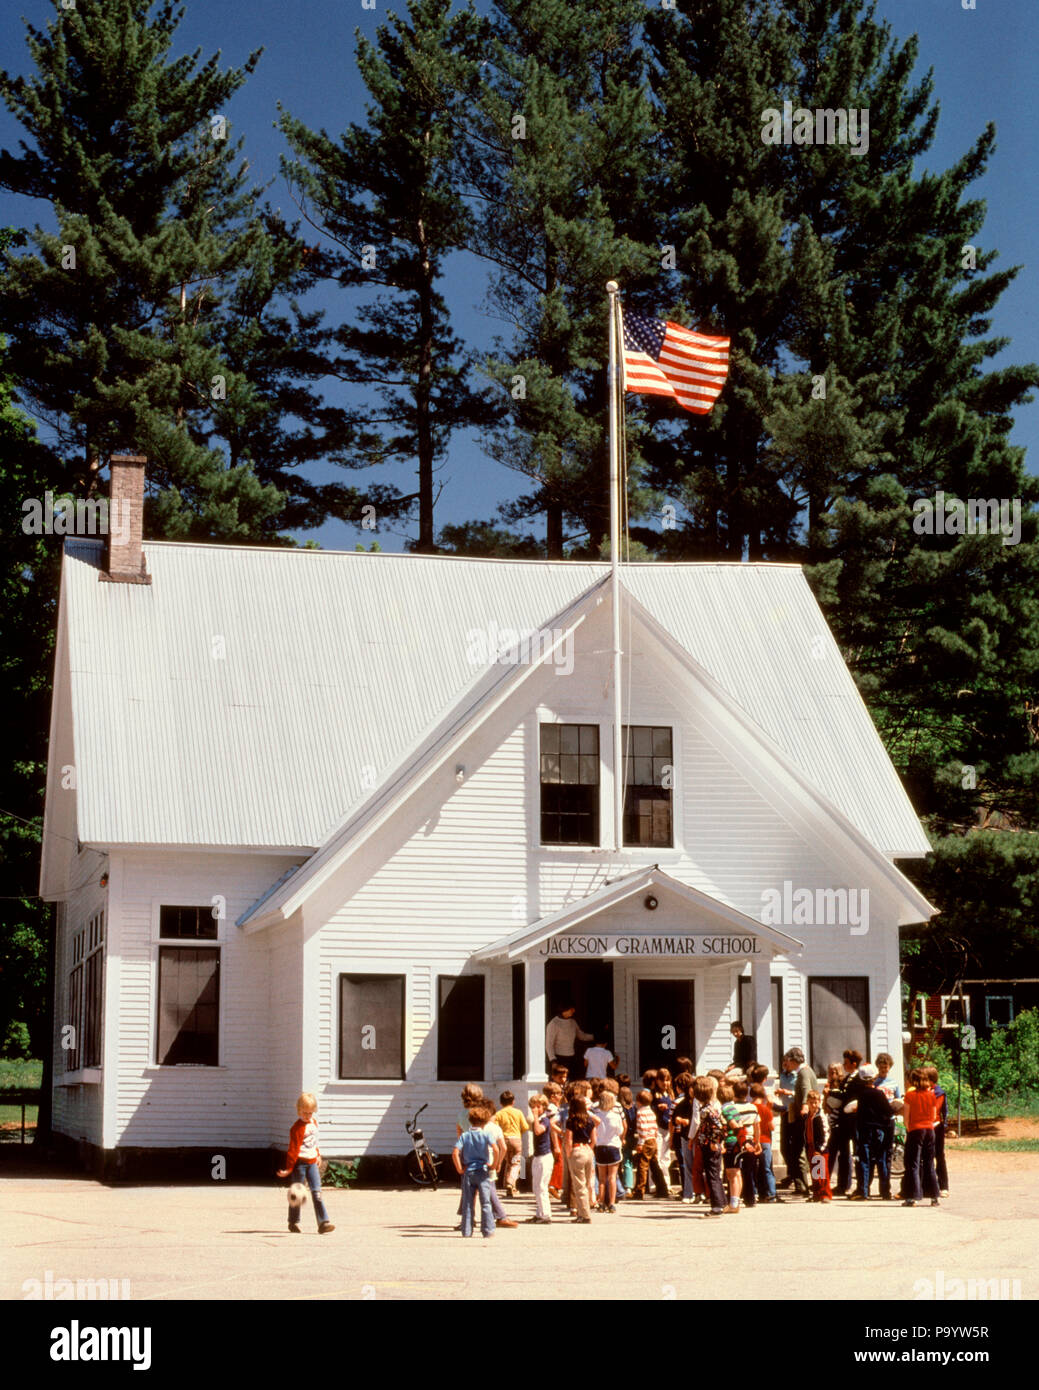 1980s CHILDREN ASSEMBLED OUTSIDE GRAMMAR SCHOOL JACKSON NEW HAMPSHIRE USA - ks17602 SEB001 HARS UNITED STATES OF AMERICA MALES BUILDINGS SUNNY AMERICANA HAMPSHIRE NORTH AMERICA GOALS SCHOOLS GRADE BRIGHT PROPERTY ENTERING EXTERIOR KNOWLEDGE RECESS PRIMARY SCHOOLHOUSE REAL ESTATE STRUCTURES ASSEMBLED EDIFICE GRAMMAR K-12 GRADE SCHOOL GROWTH JUVENILES NEW ENGLAND RED WHITE AND BLUE STARS AND STRIPS CAUCASIAN ETHNICITY JACKSON NEW HAMPSHIRE OLD FASHIONED Stock Photo